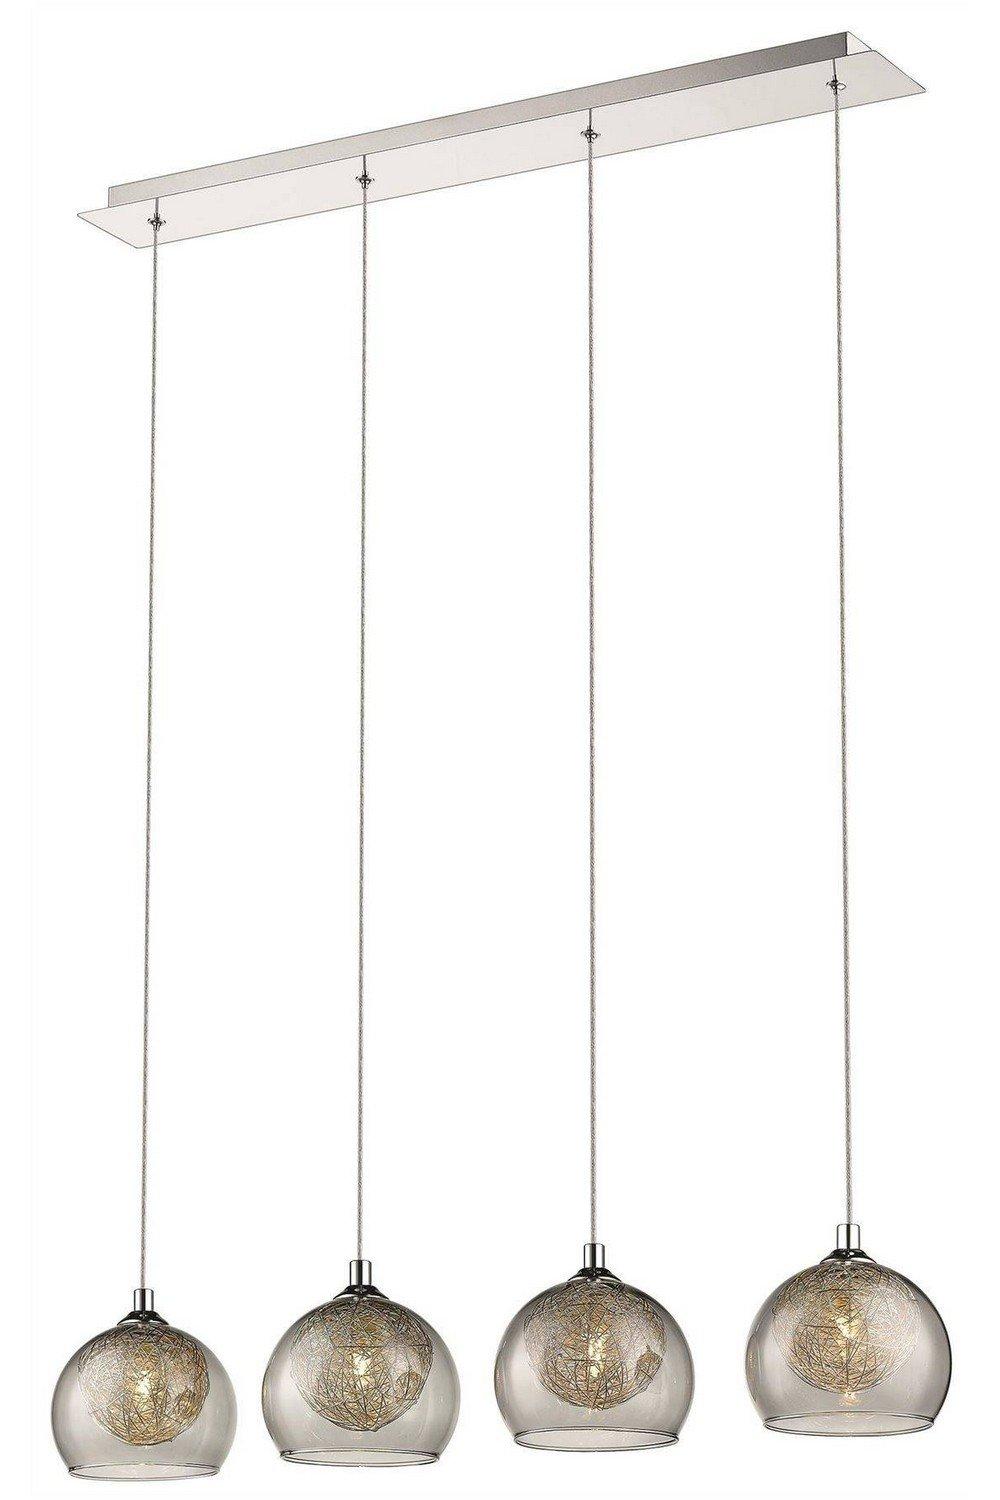 Spring 4 Light Ceiling Pendant Bar Chrome Smoked grey with Glass Shades G9